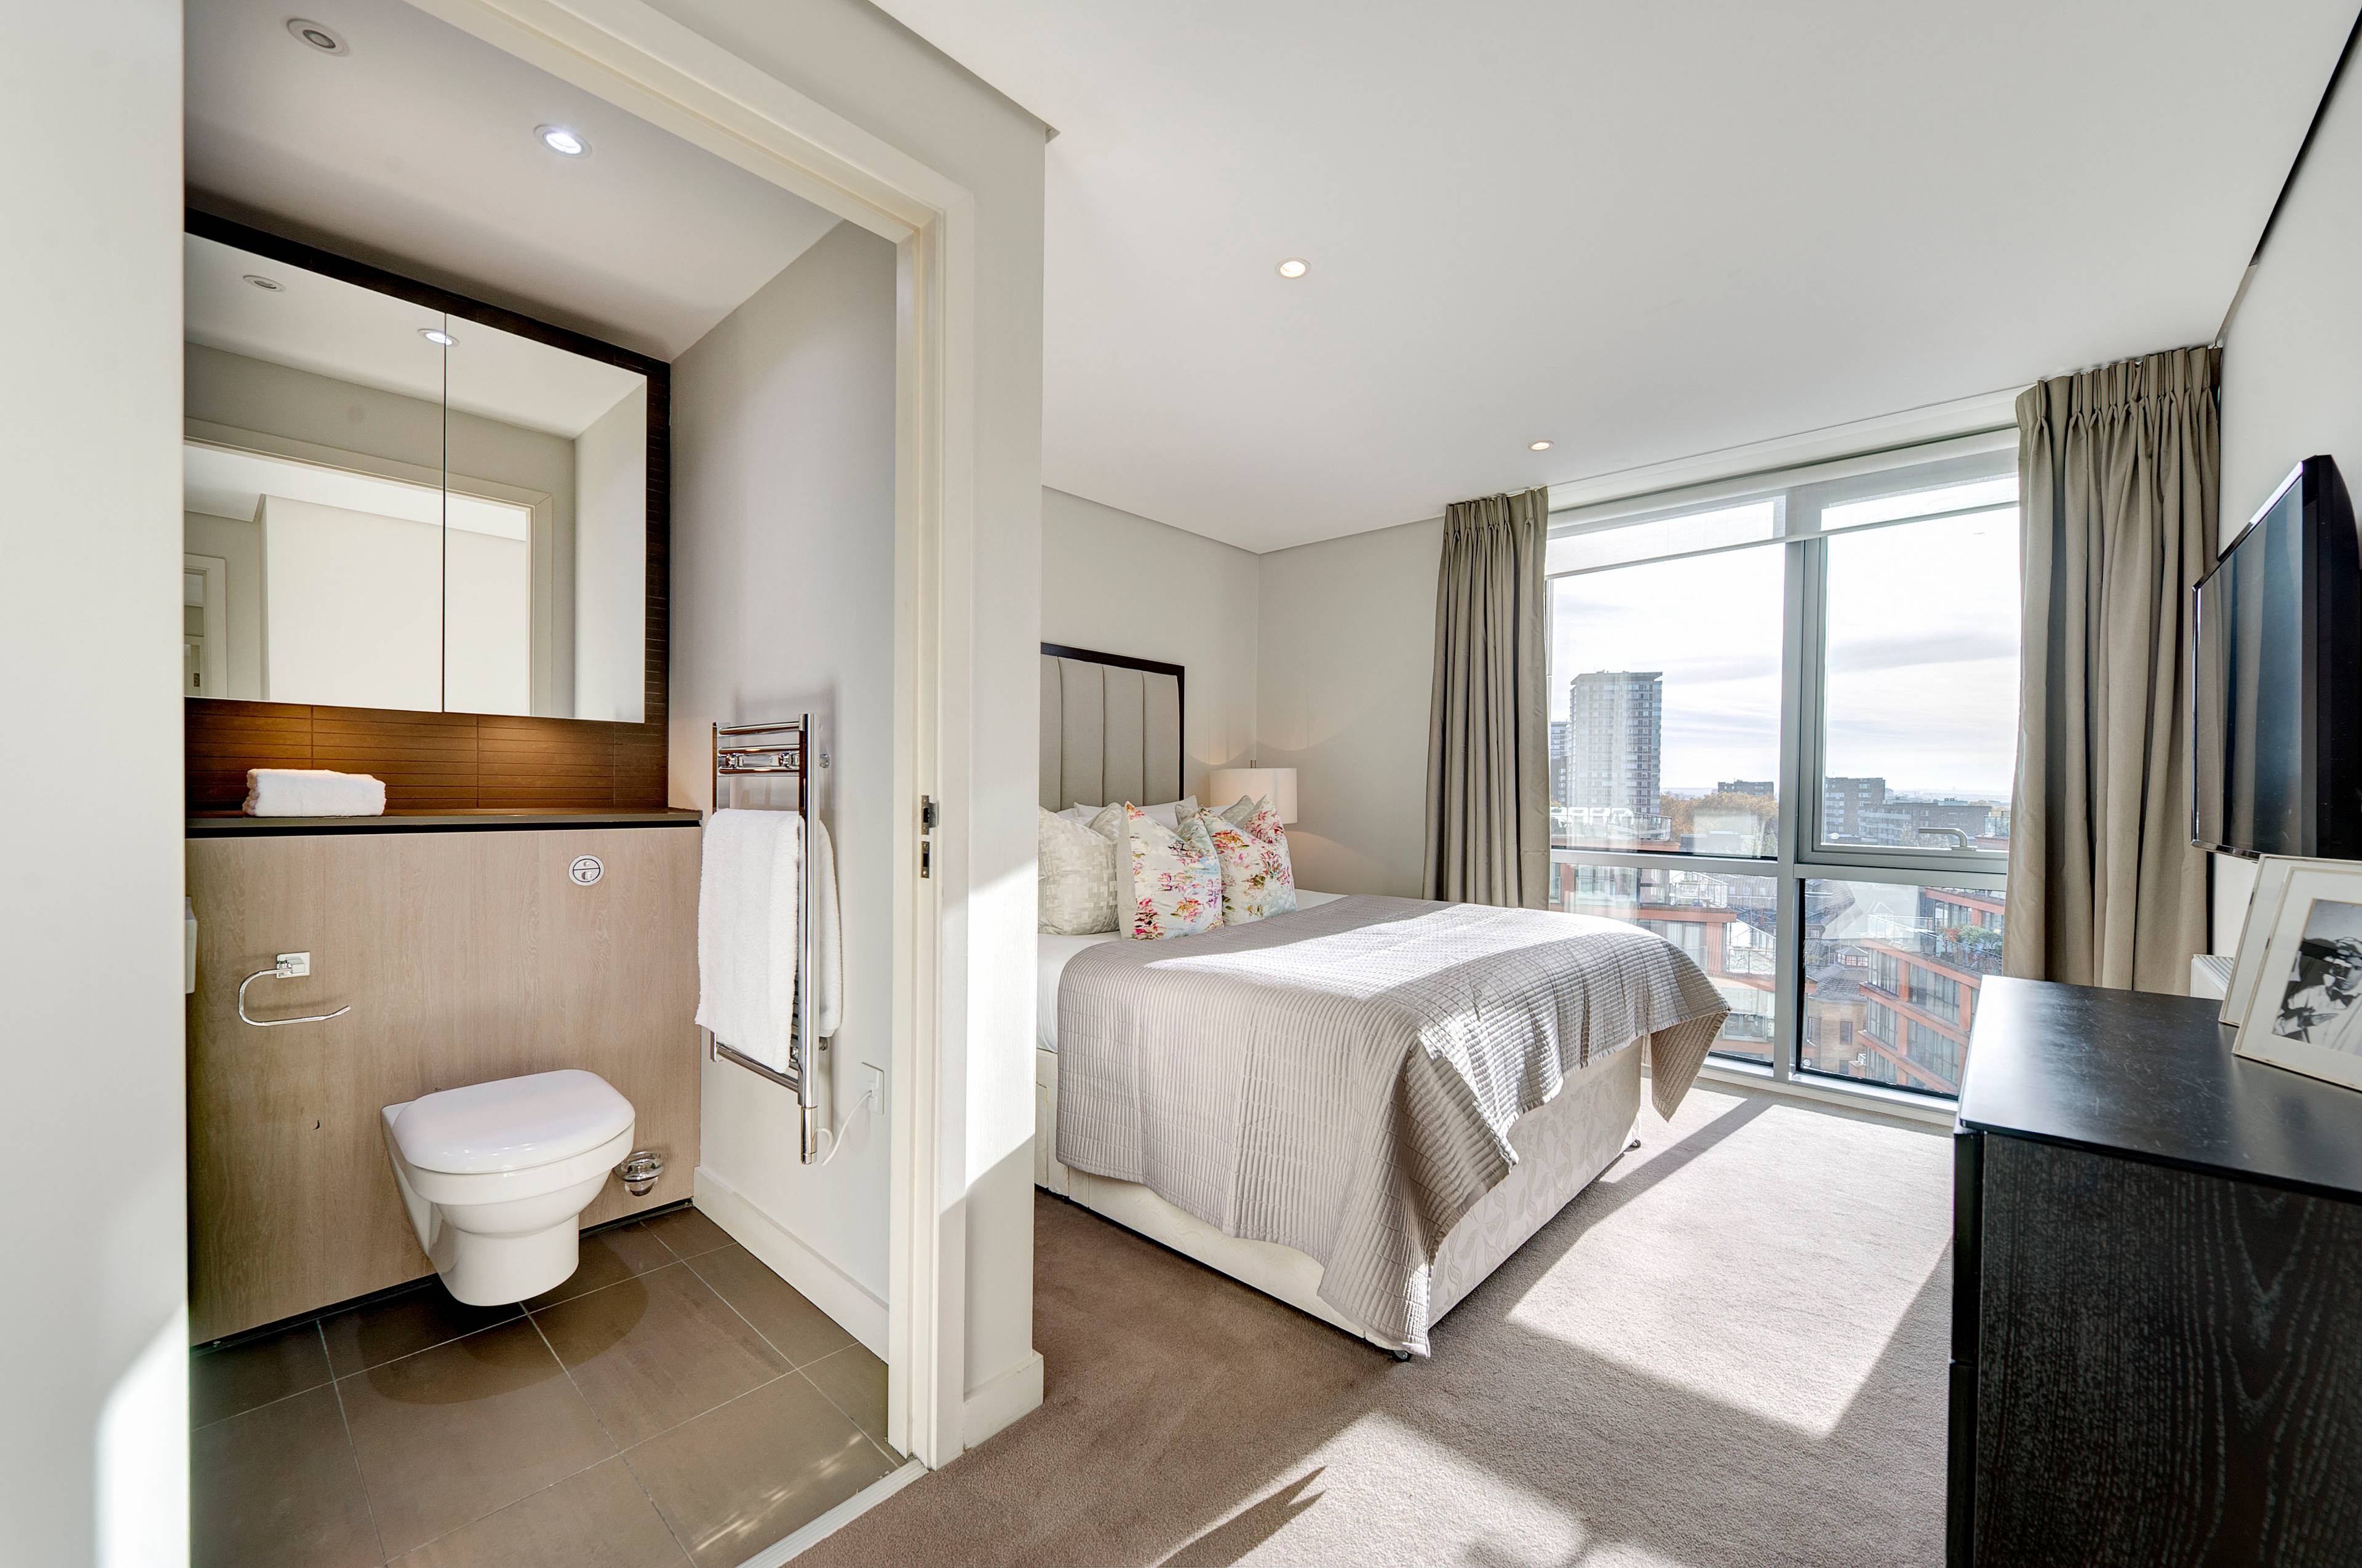 A stunning three-bedroom interior designed apartment located on the 9th floor within this prestigious development set within the heart of Paddington Basin.